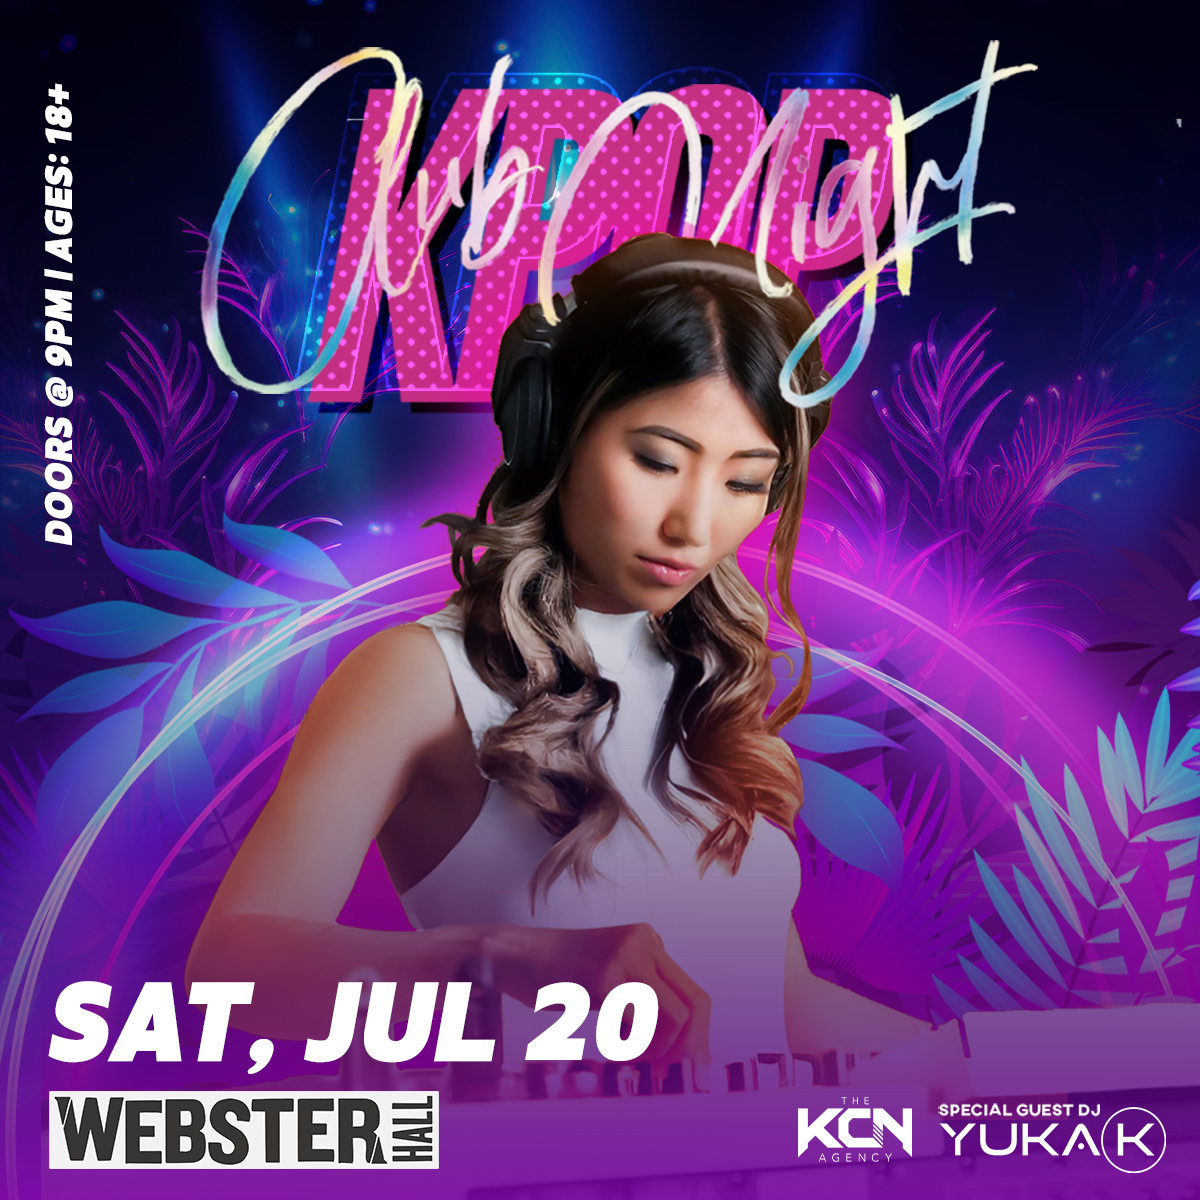 JUST ANNOUNCED: KPOP Club Night is back on Sat, Jul 20 ✨ tickets are on sale now!